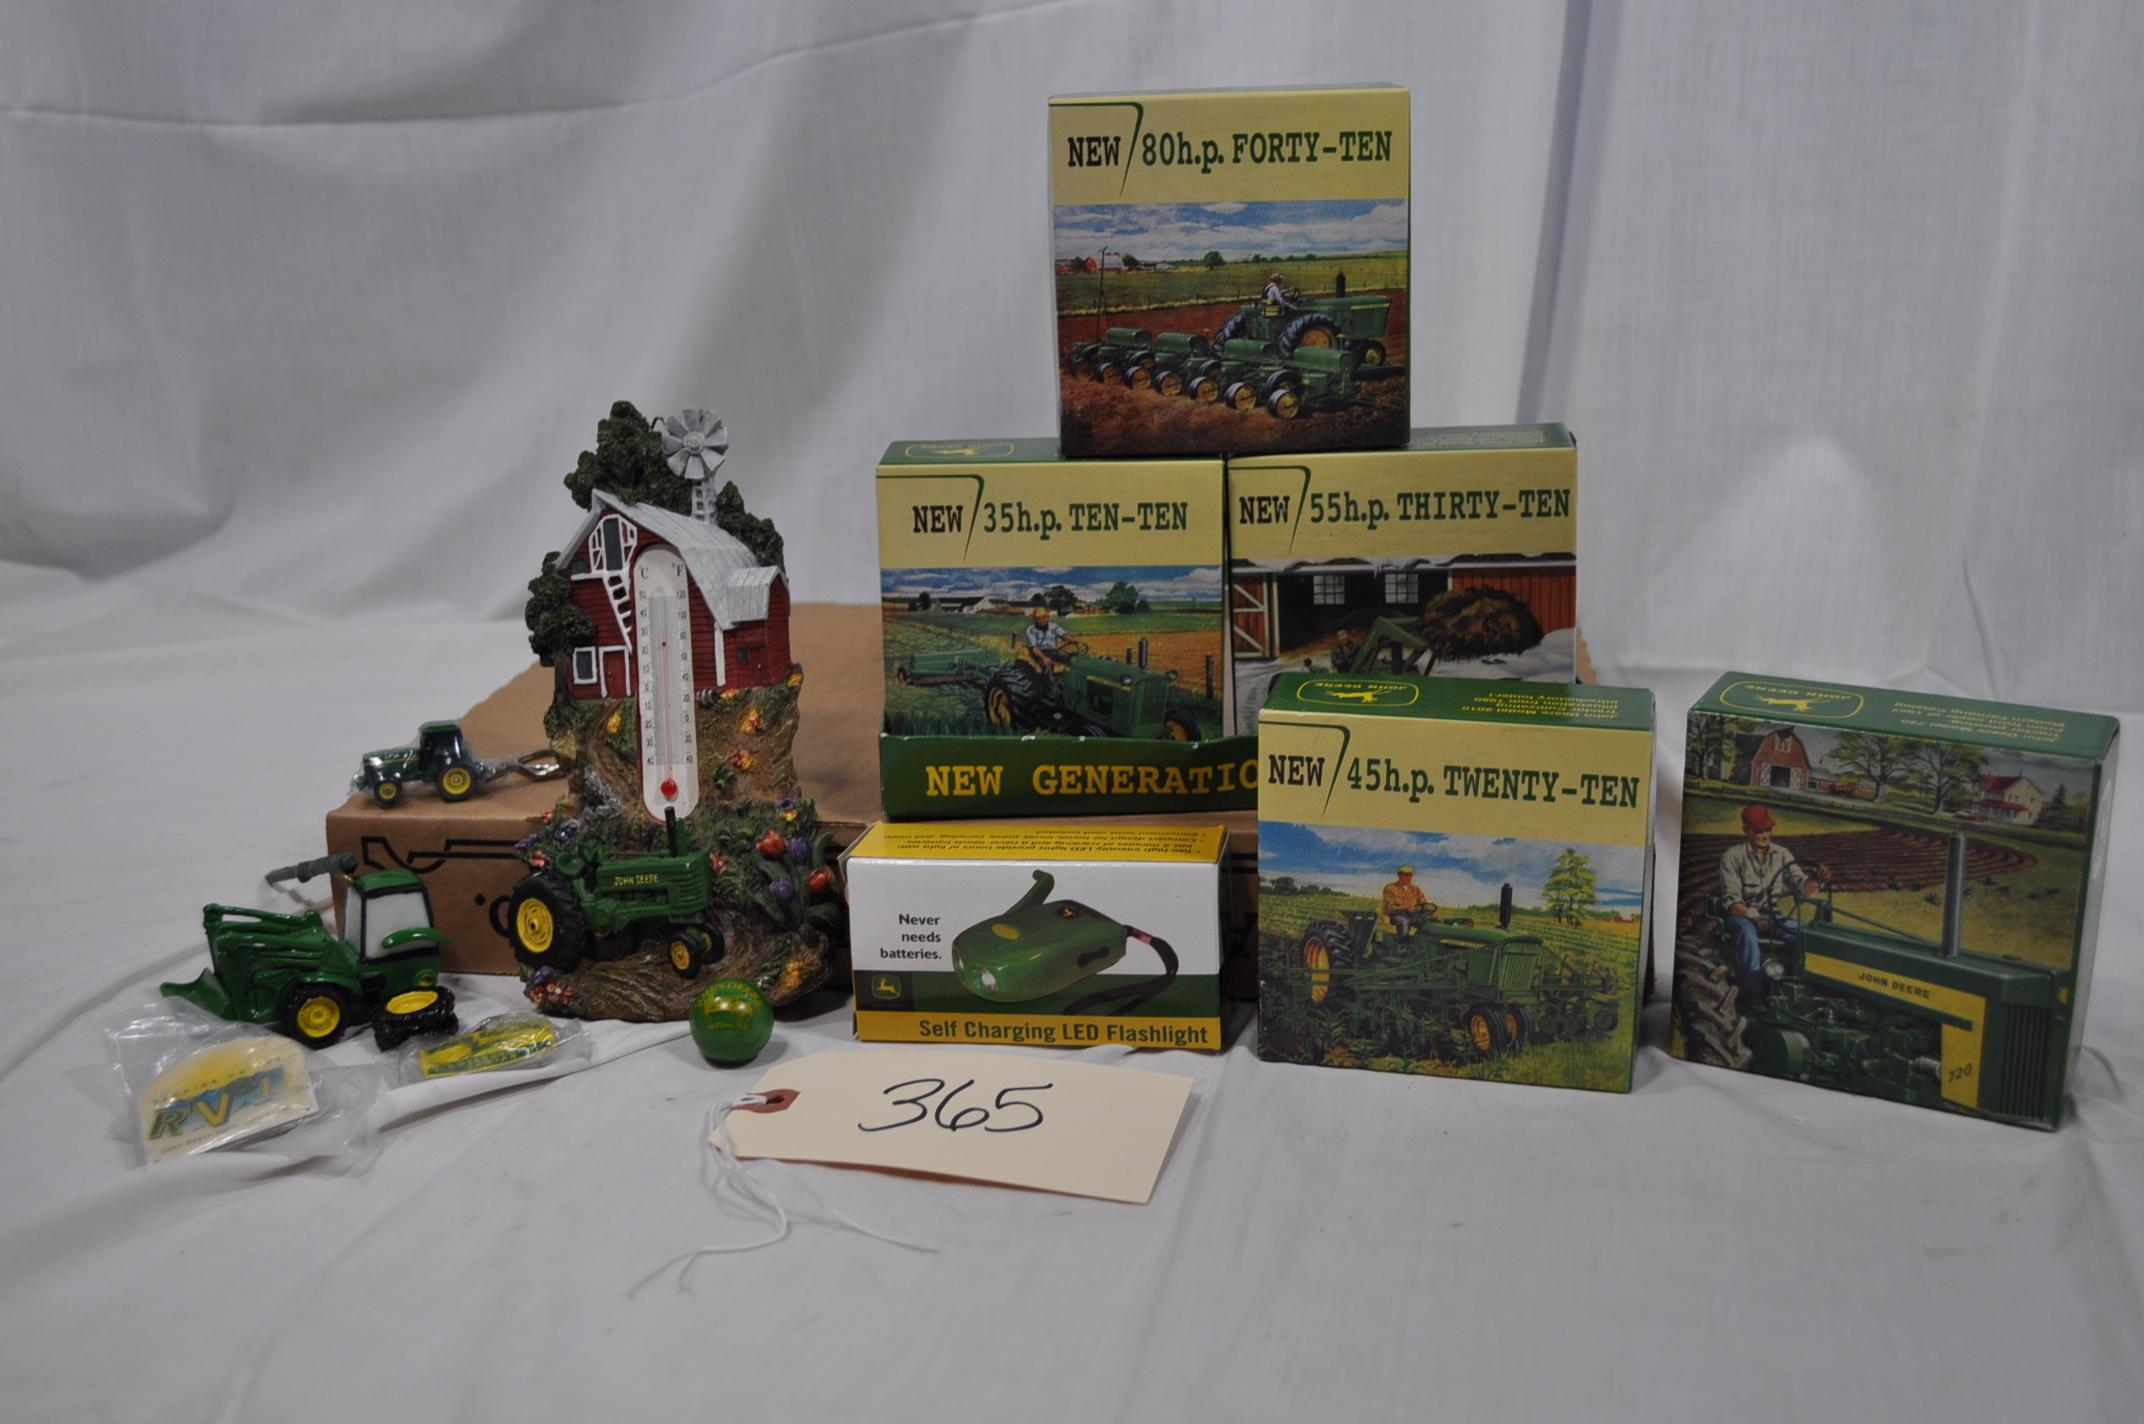 5 John Deere little puzzles, tree ornament, thermometer, flashlight,2 key rings, button and marble